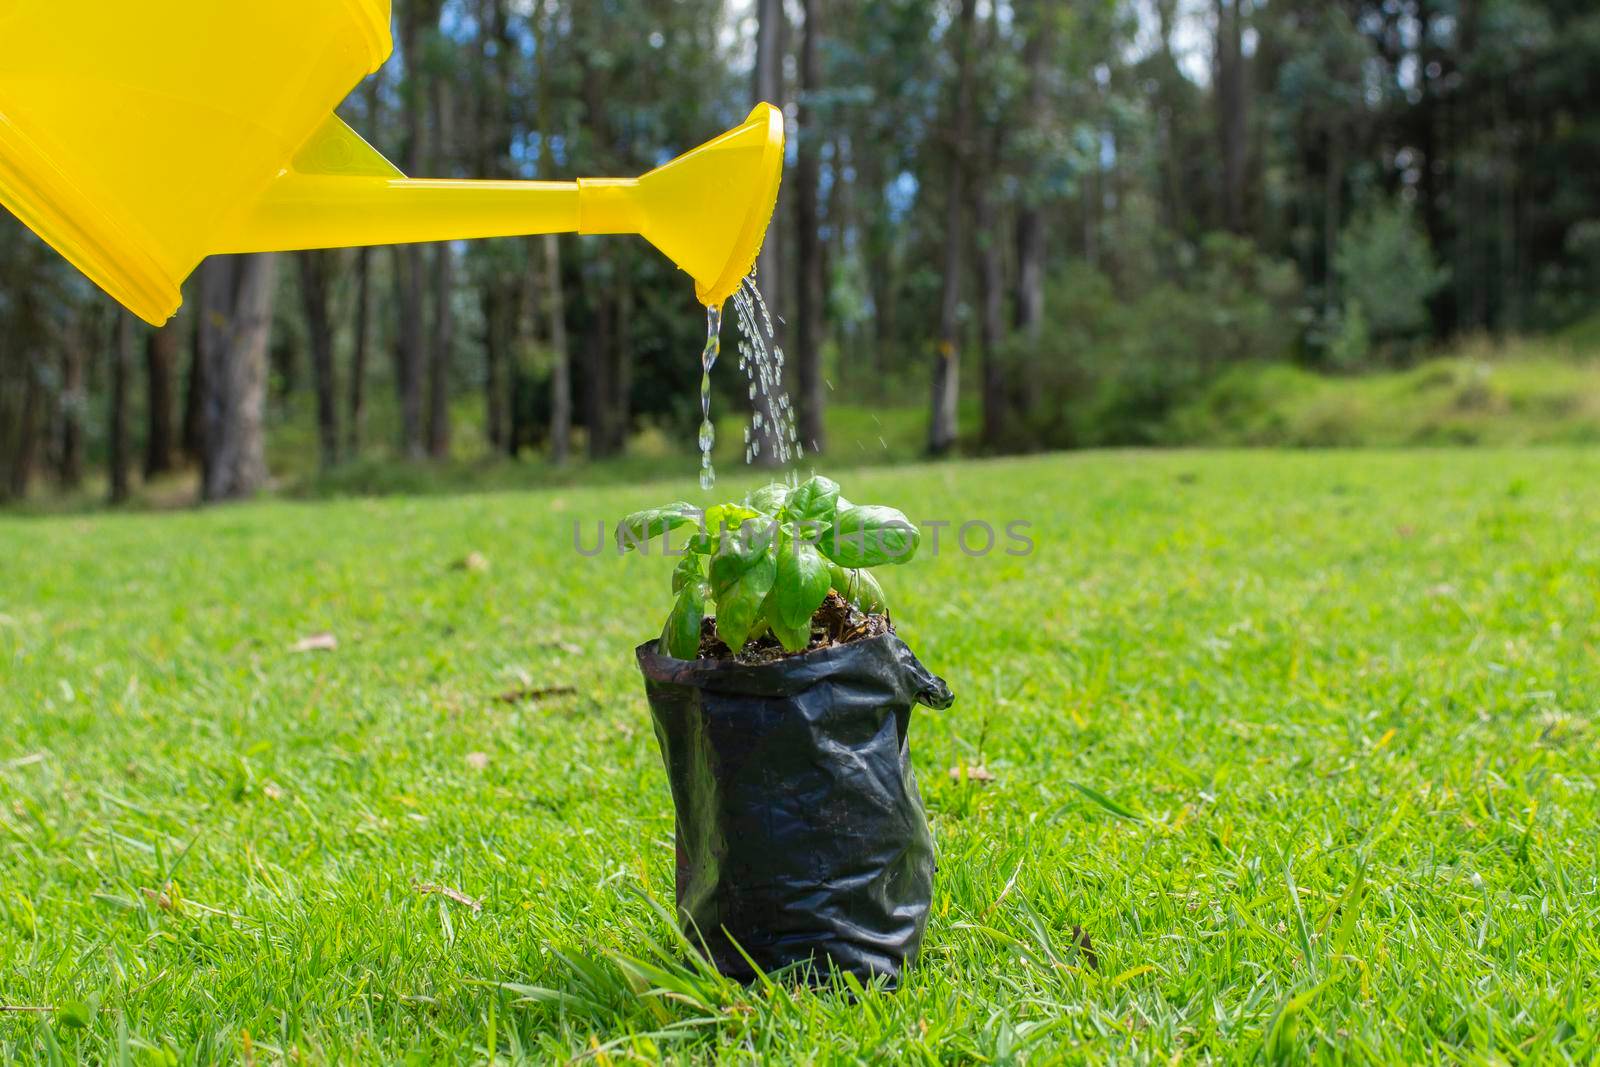 Yellow watering can watering a small plant inside a black plastic before being planted in a field surrounded by trees in the morning